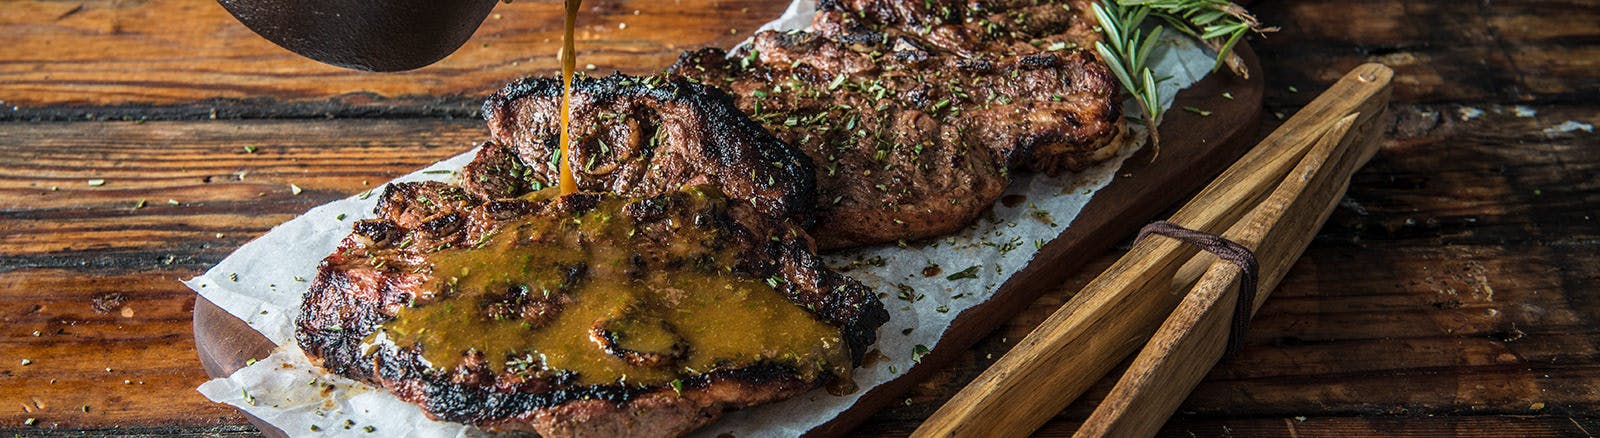 Grilled Lamb Chops with Rosemary Sauce